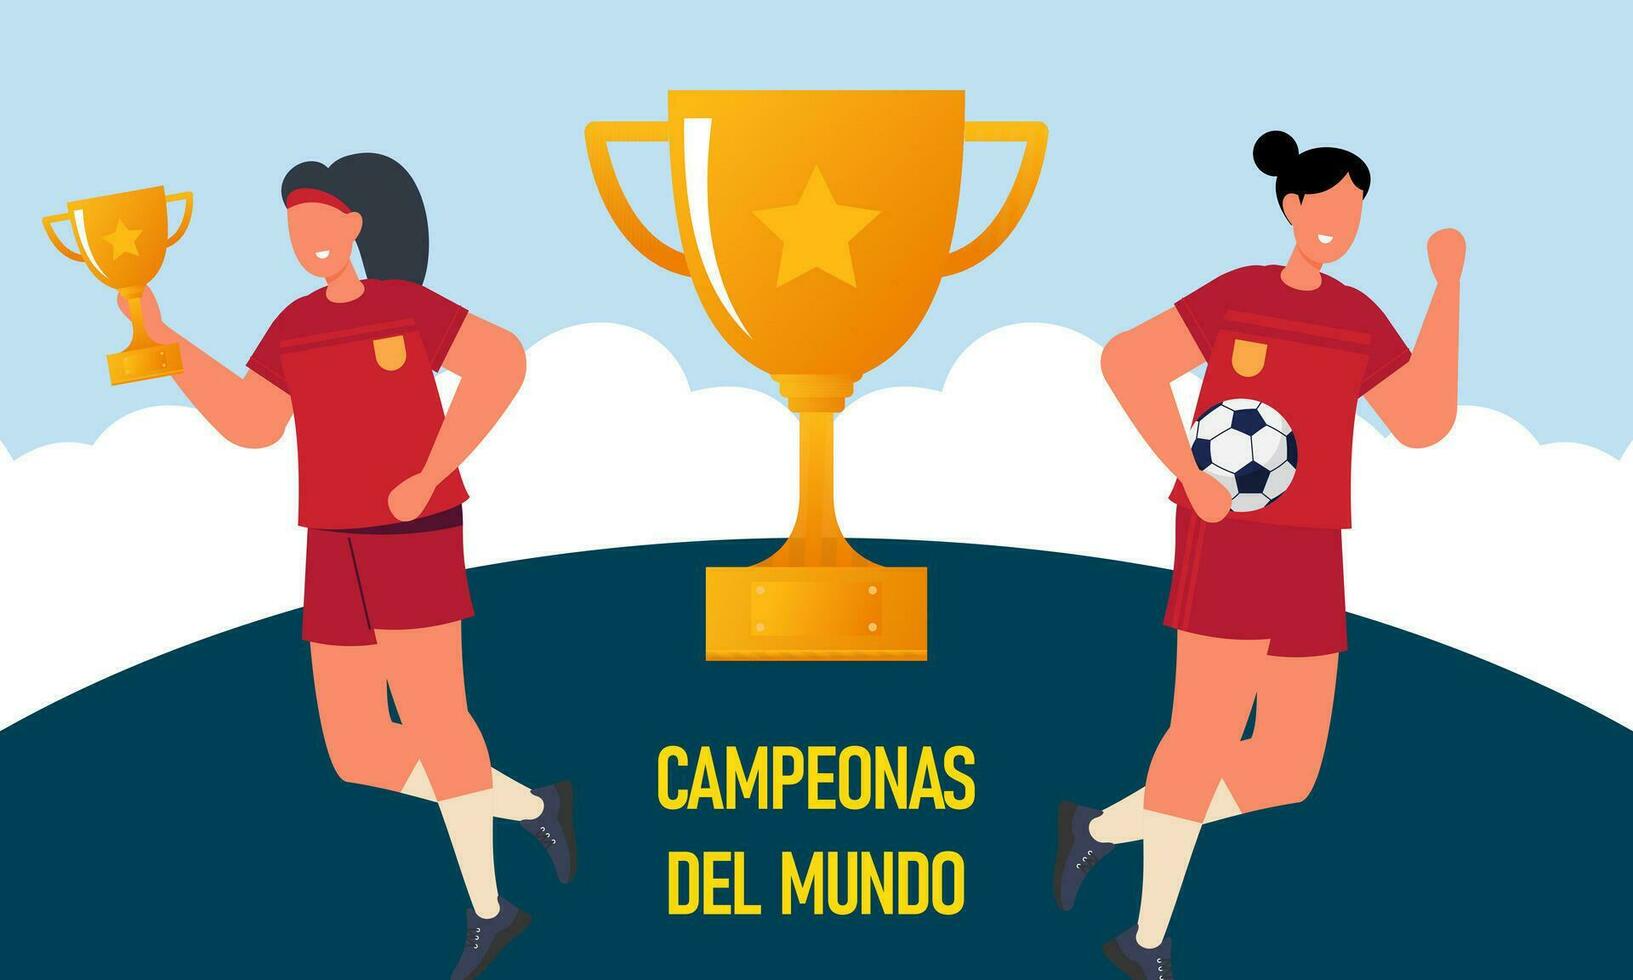 Victory for the Spanish women s national football team vector